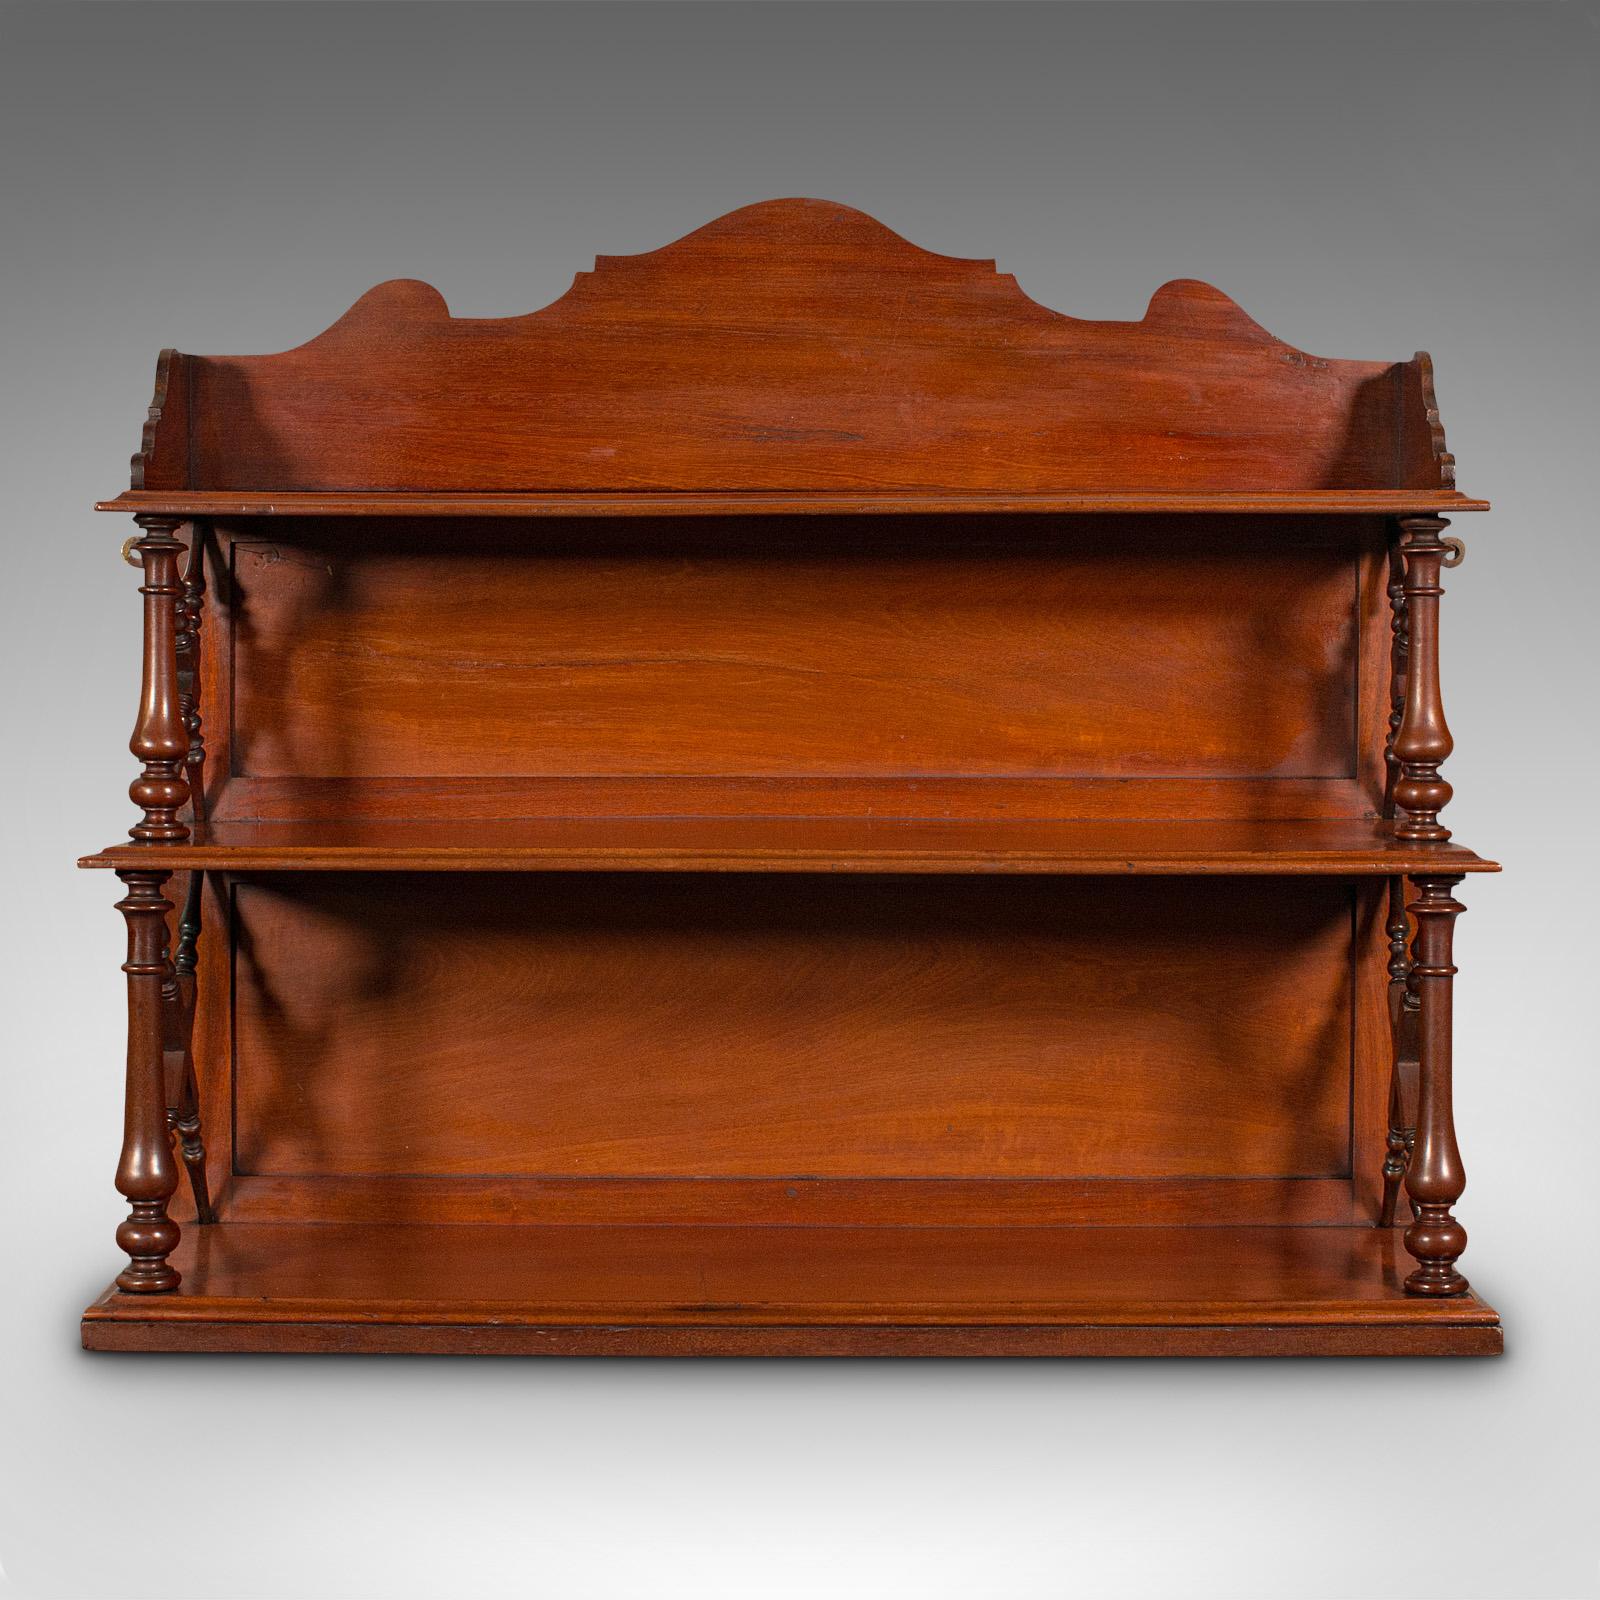 This is an antique mounted whatnot. An English, mahogany wall mounted book shelf, dating to the late Victorian period, circa 1900.

Attractive free-standing or wall mounted display shelves
Displaying a desirable aged patina and in good